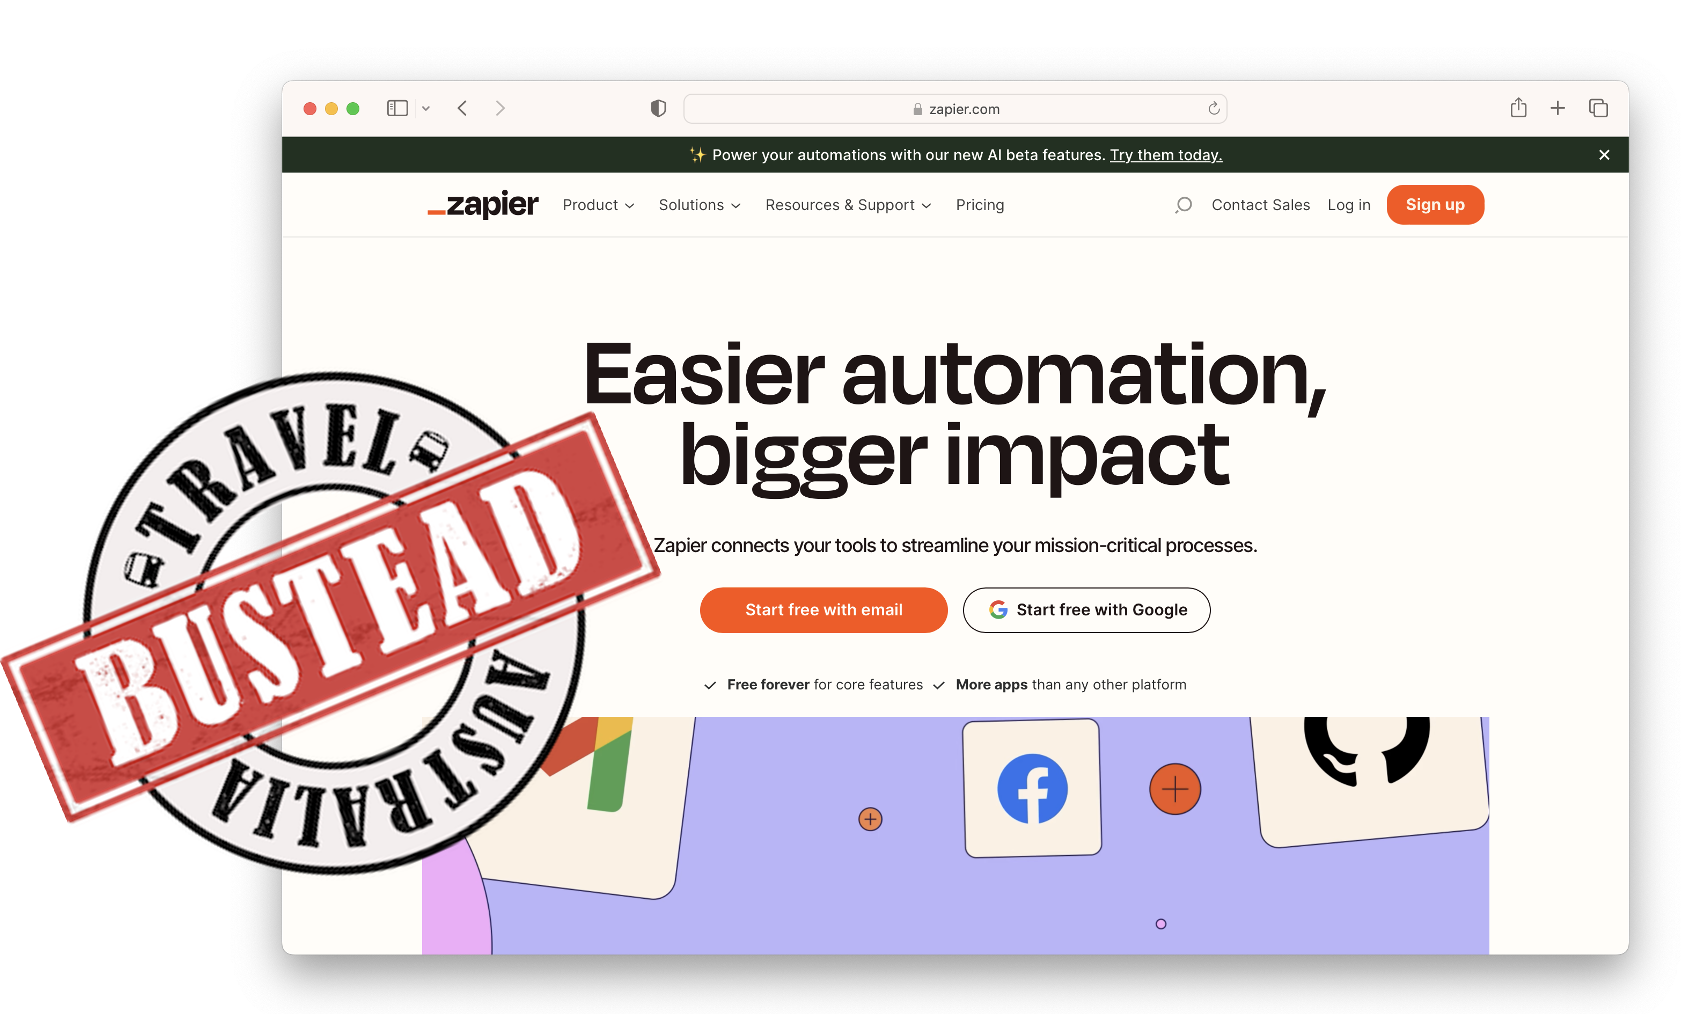 Bustead using Zapier to enable easier automation and have a bigger impact